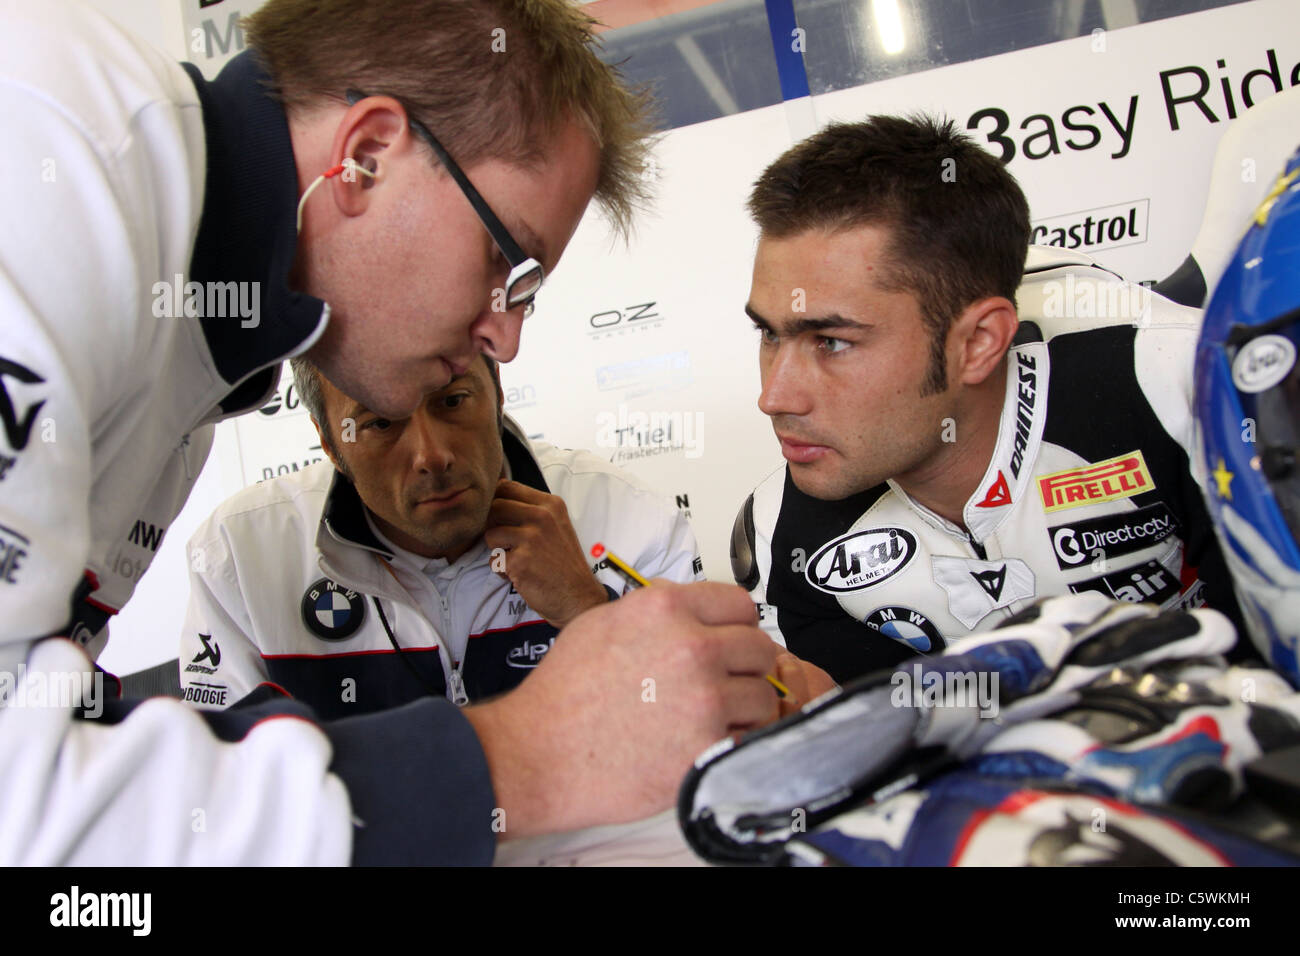 Leon Haslam discusses lap times with pit crew before second practice at Silverstone Stock Photo